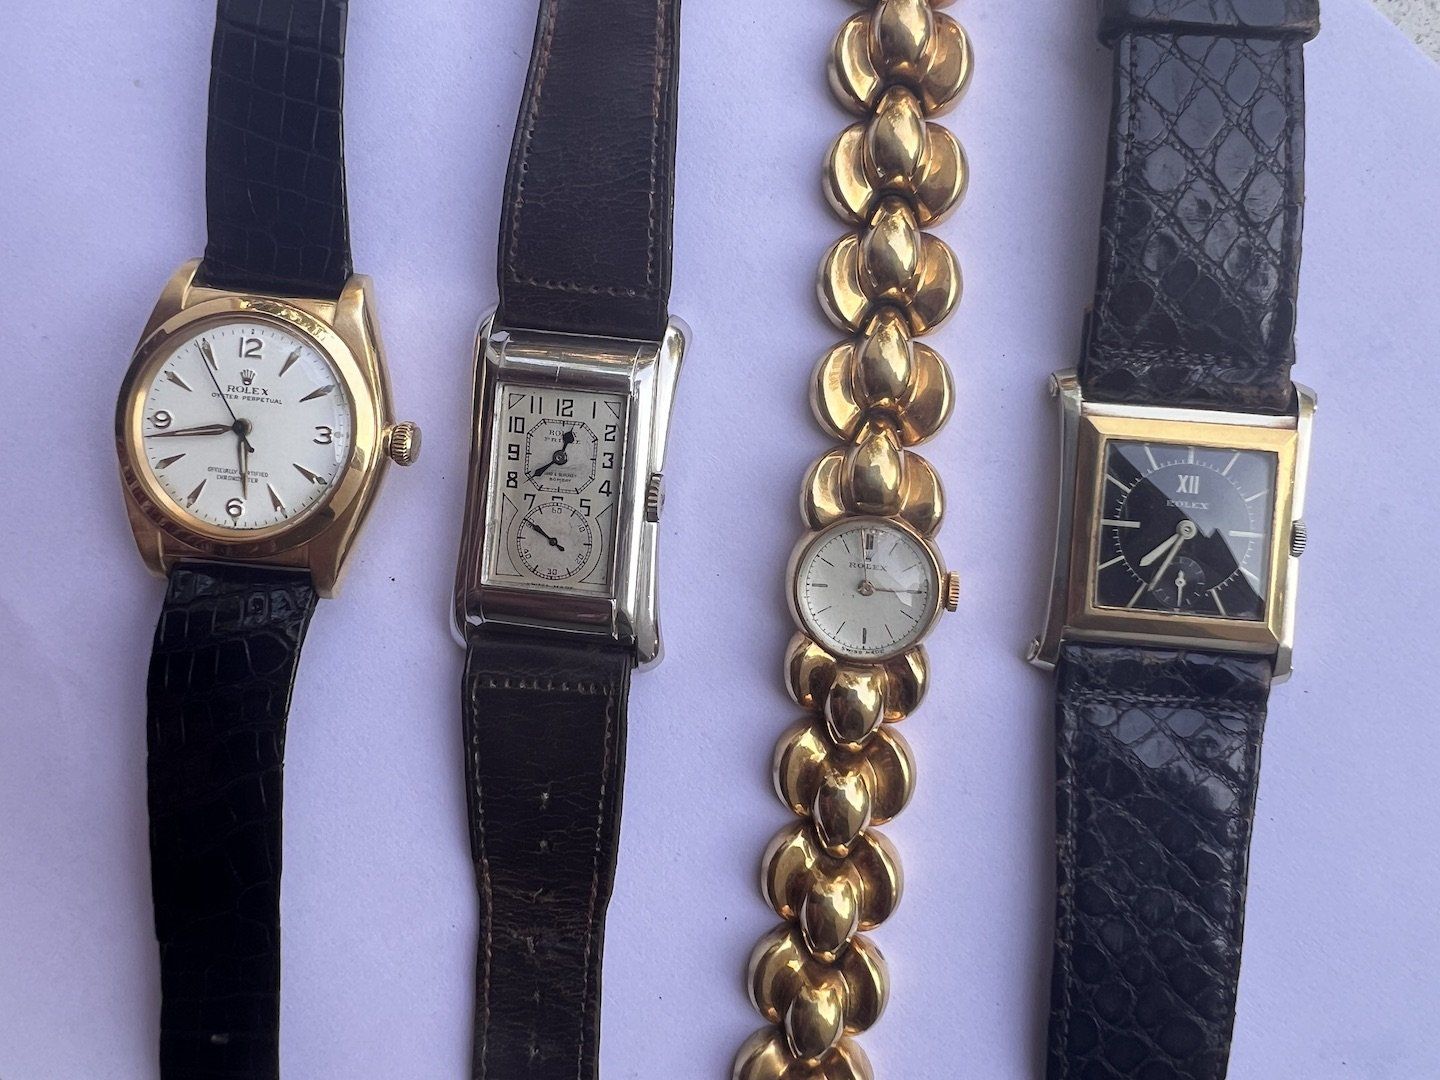 Left to right: Rolex Bubbleback Oyster Perpetual 1940, Rolex Prince Brancard wrist watch,1920